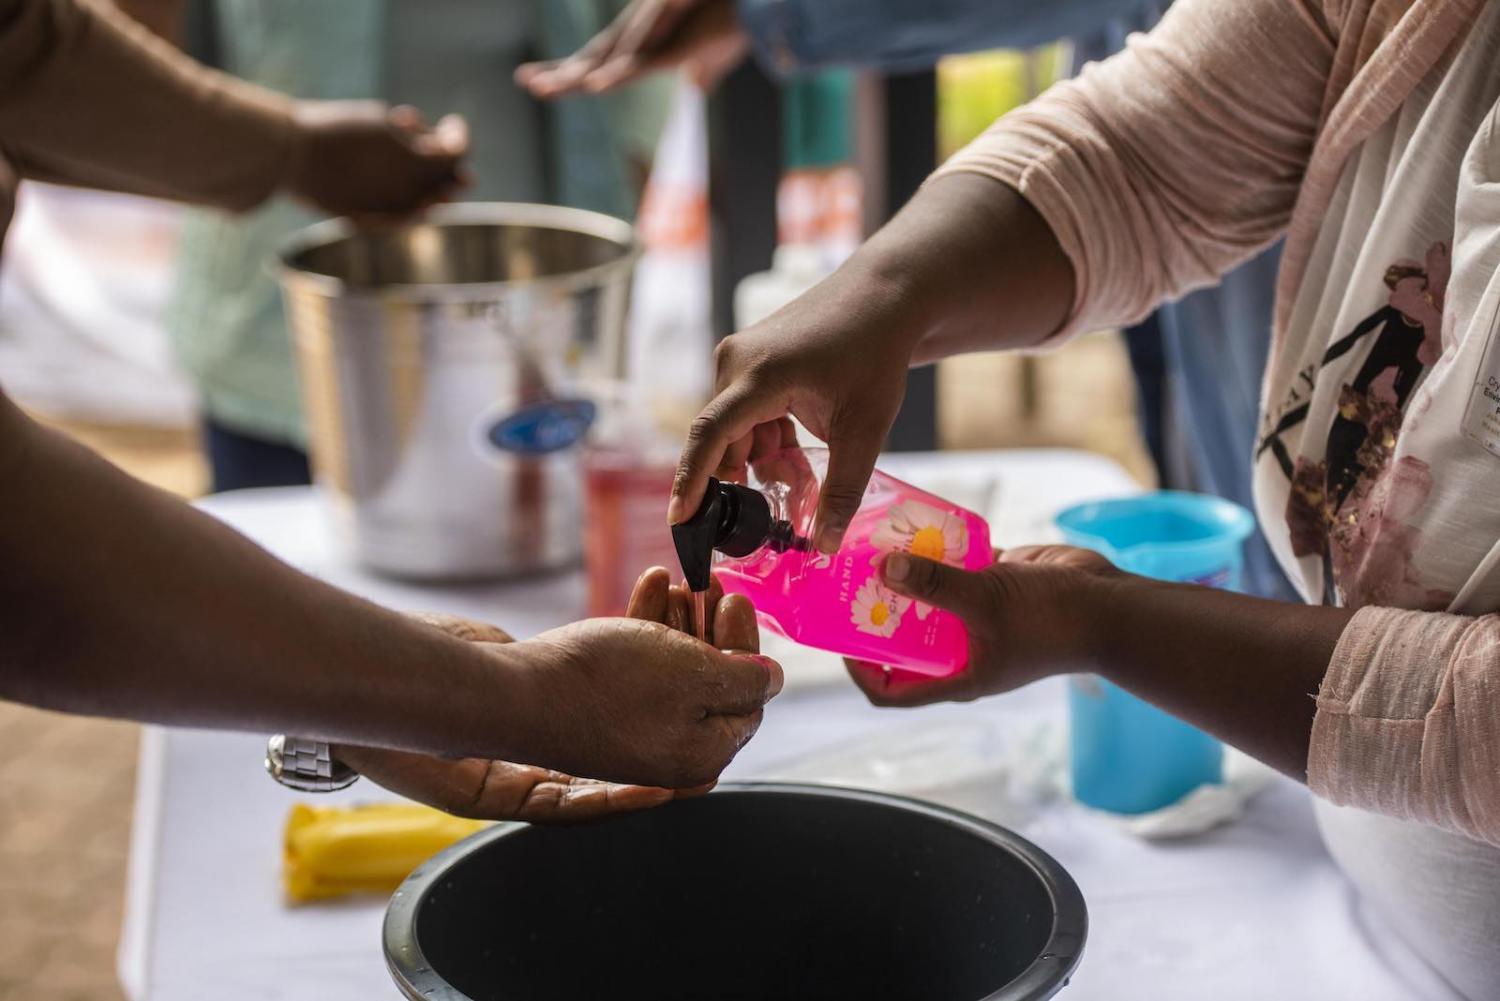 Handwashing before a media briefing on measures to prevent the spread of coronavirus, Midrand, South Africa, 18 March (Alet Pretorius/Gallo Images via Getty Images)